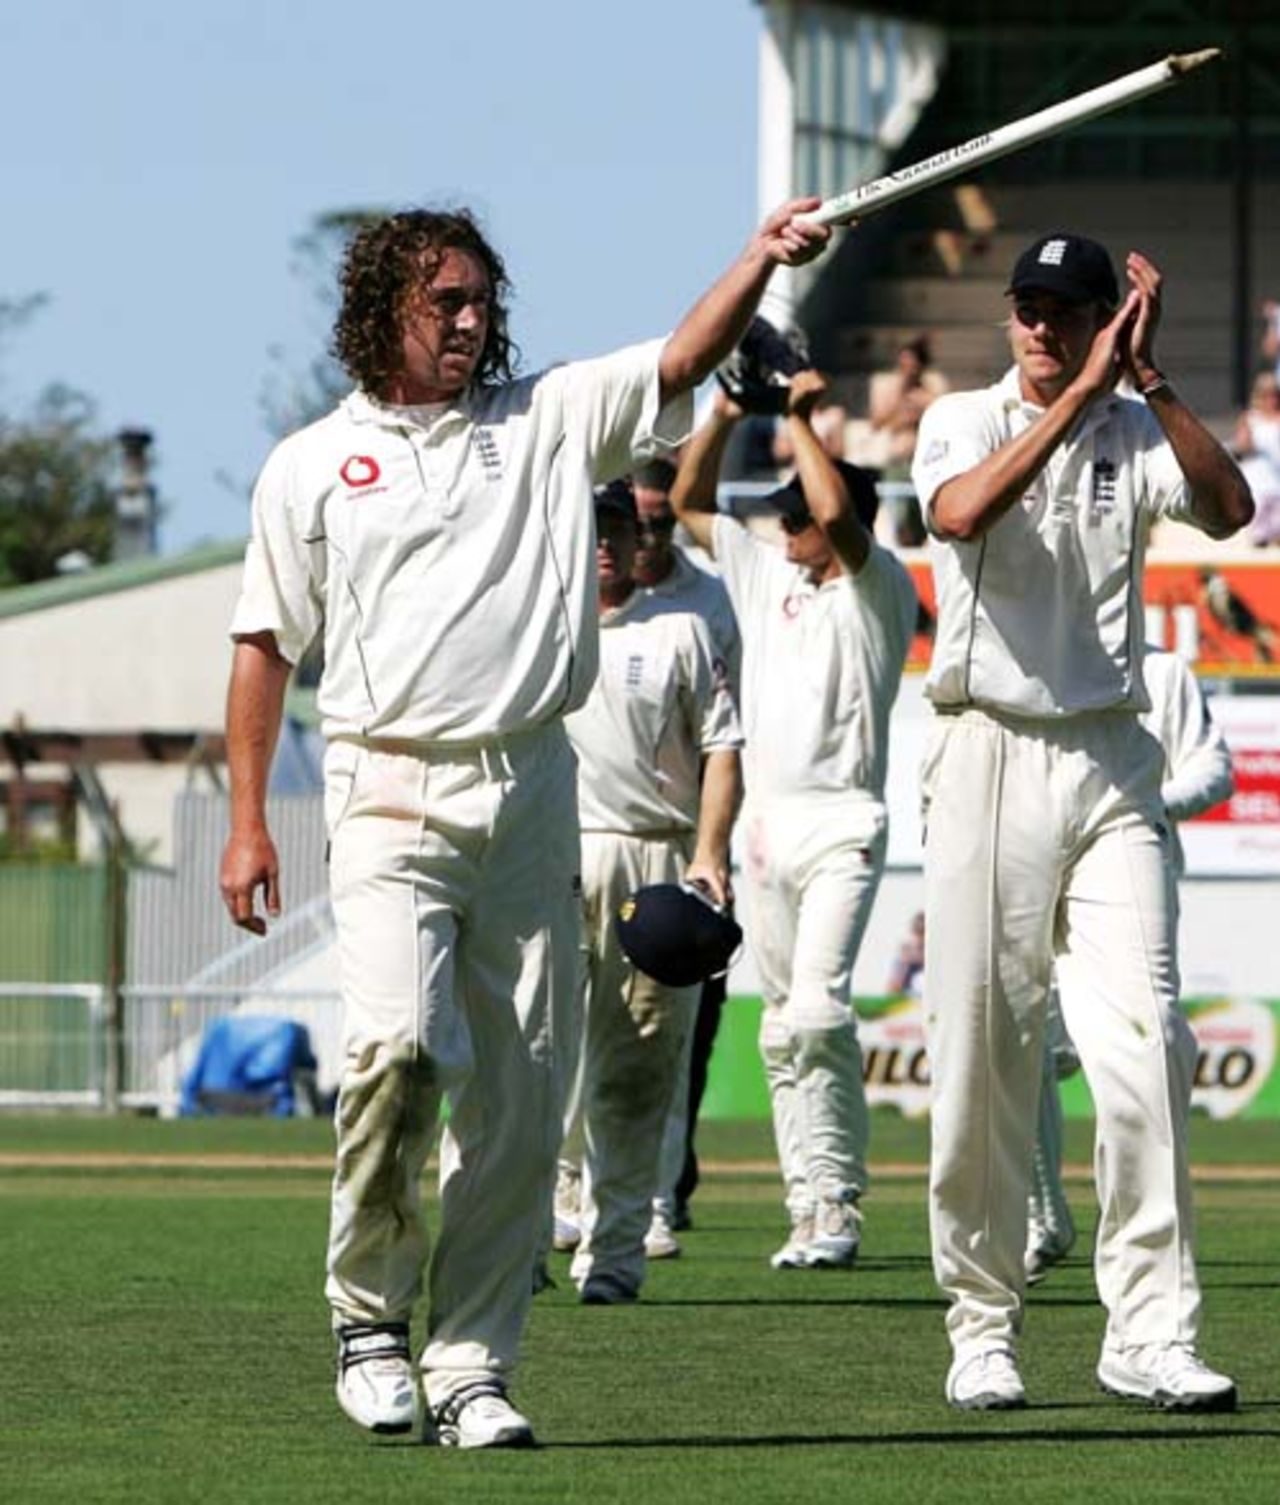 Man-of-the-Series Ryan Sidebottom leads England off the field, New Zealand v England, 3rd Test, Napier, March 23, 2008